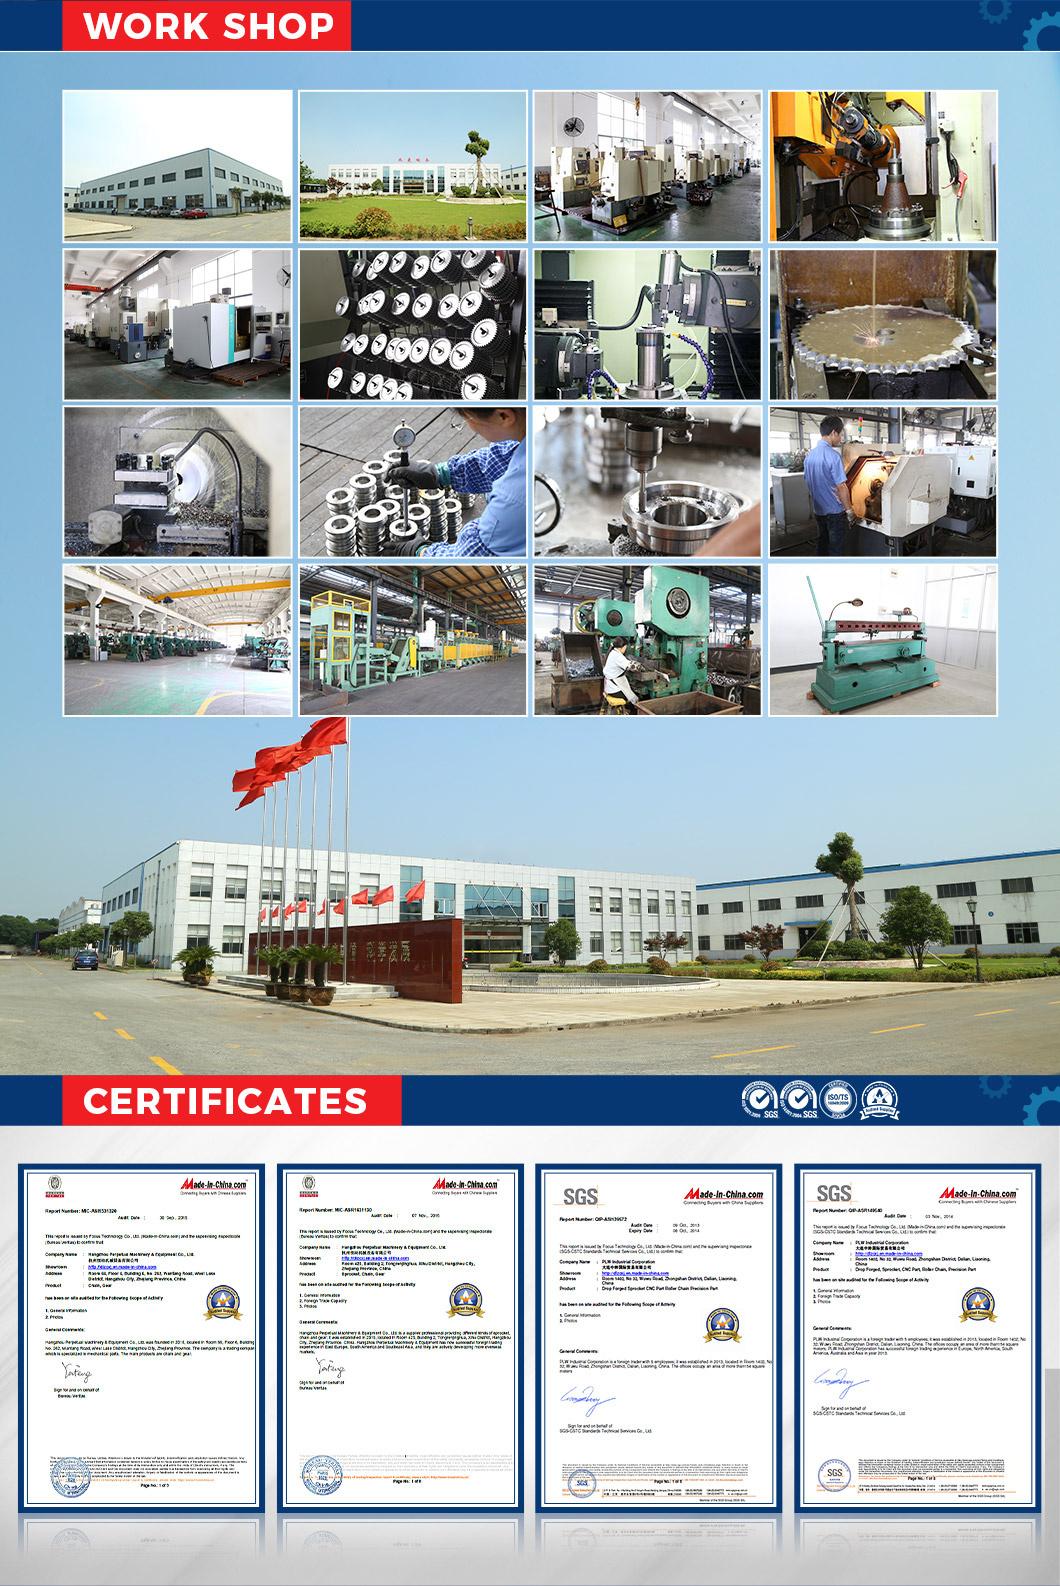 Competitive Price China Made Professional Advanced Craft ISO Standard Surface Treatment Driving Sprocket